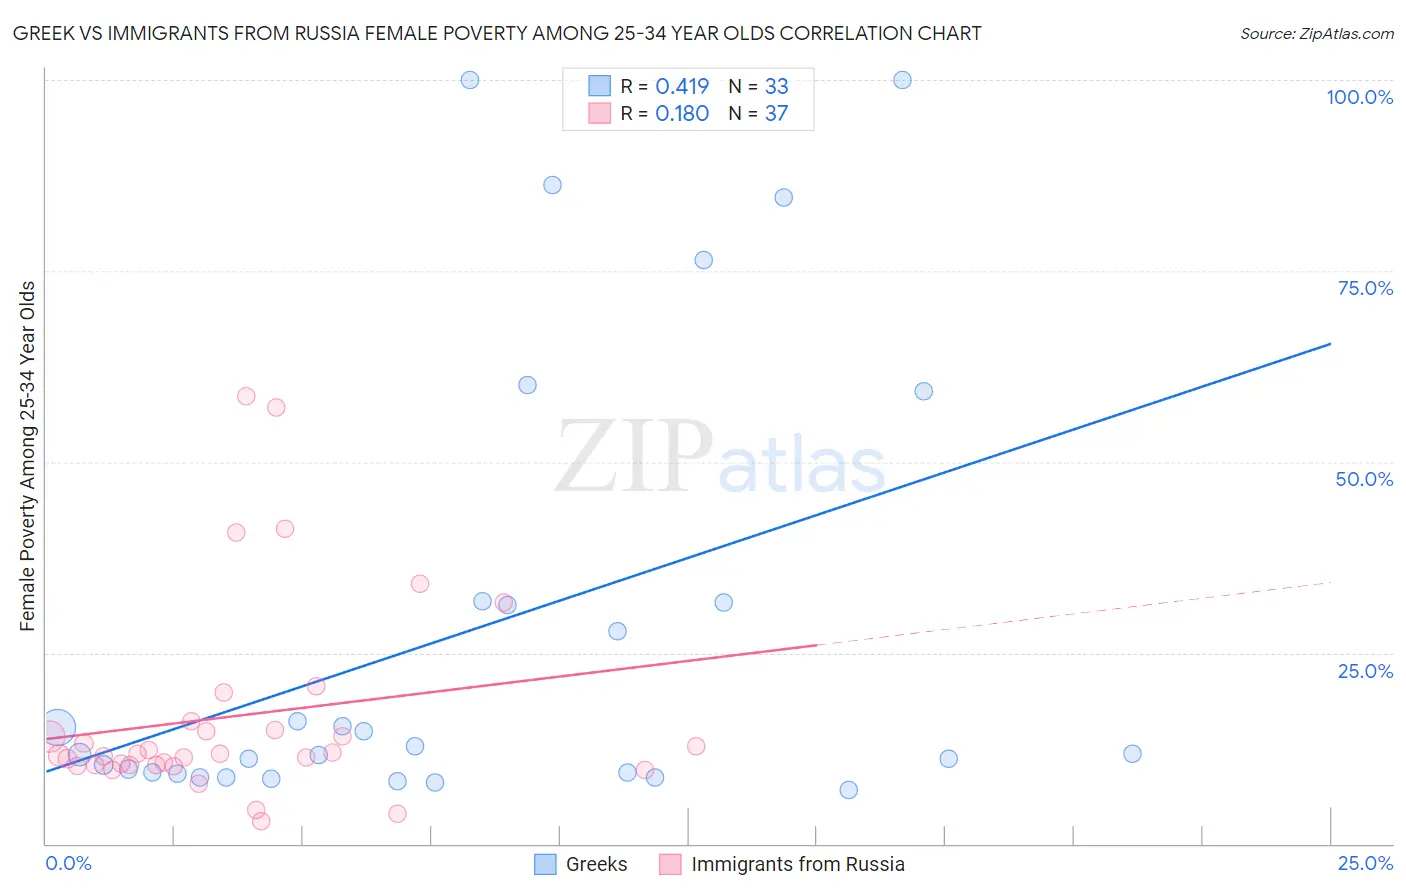 Greek vs Immigrants from Russia Female Poverty Among 25-34 Year Olds